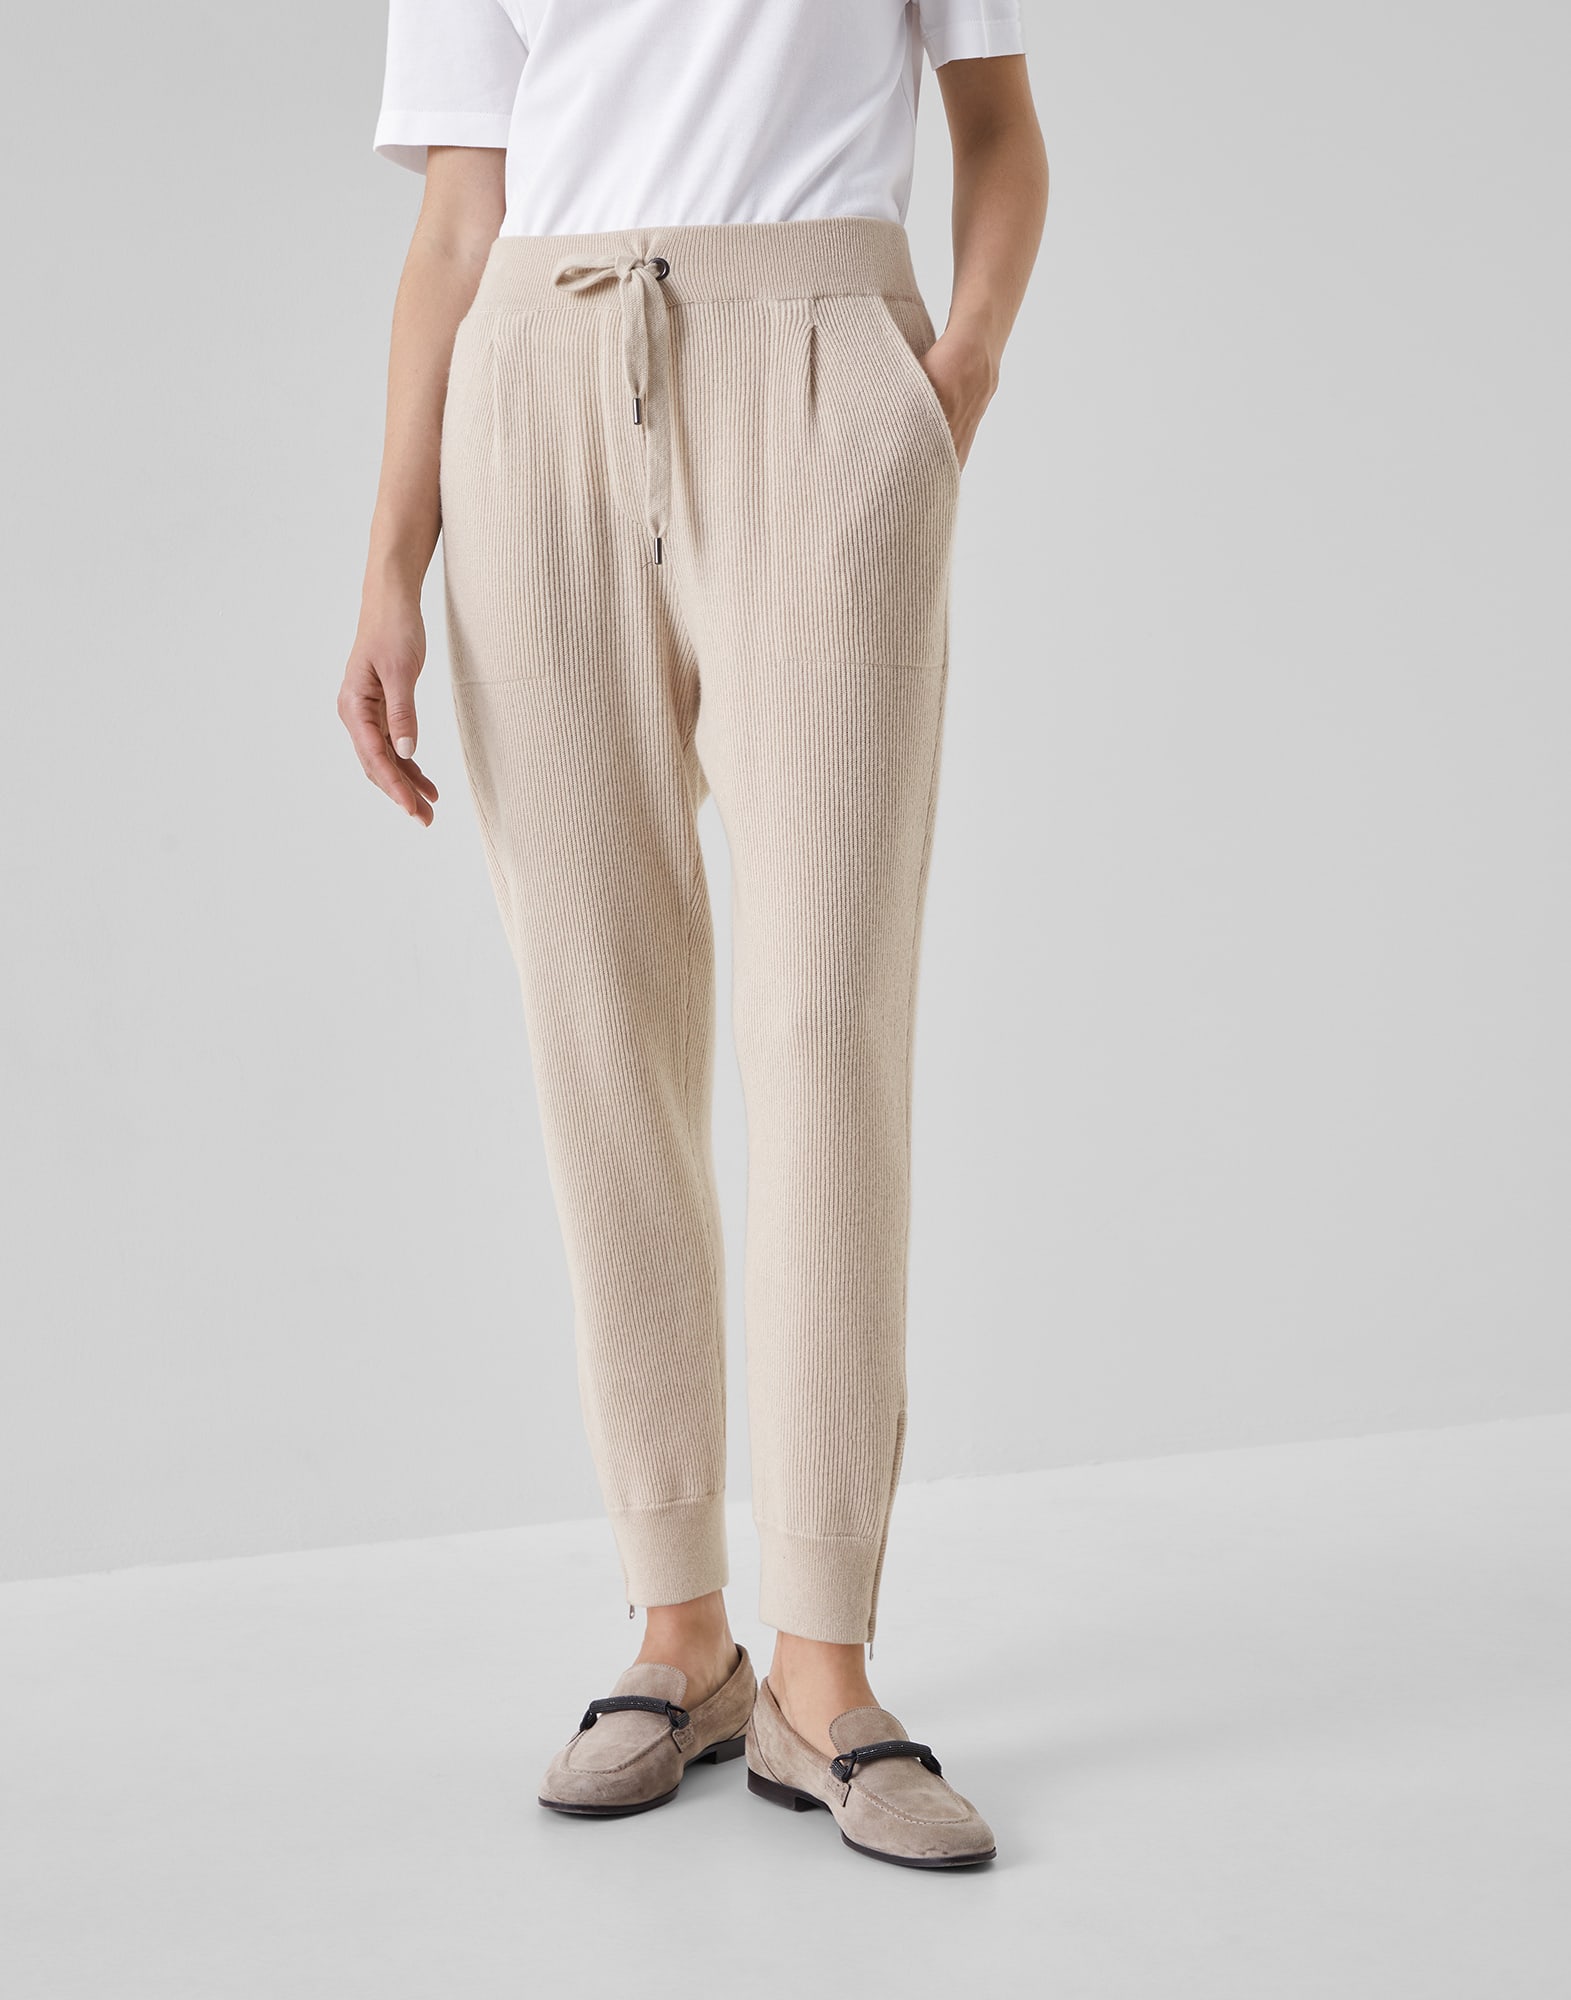 Cashmere Knit Pants in Taupe by CORDERA – New Classics Studios